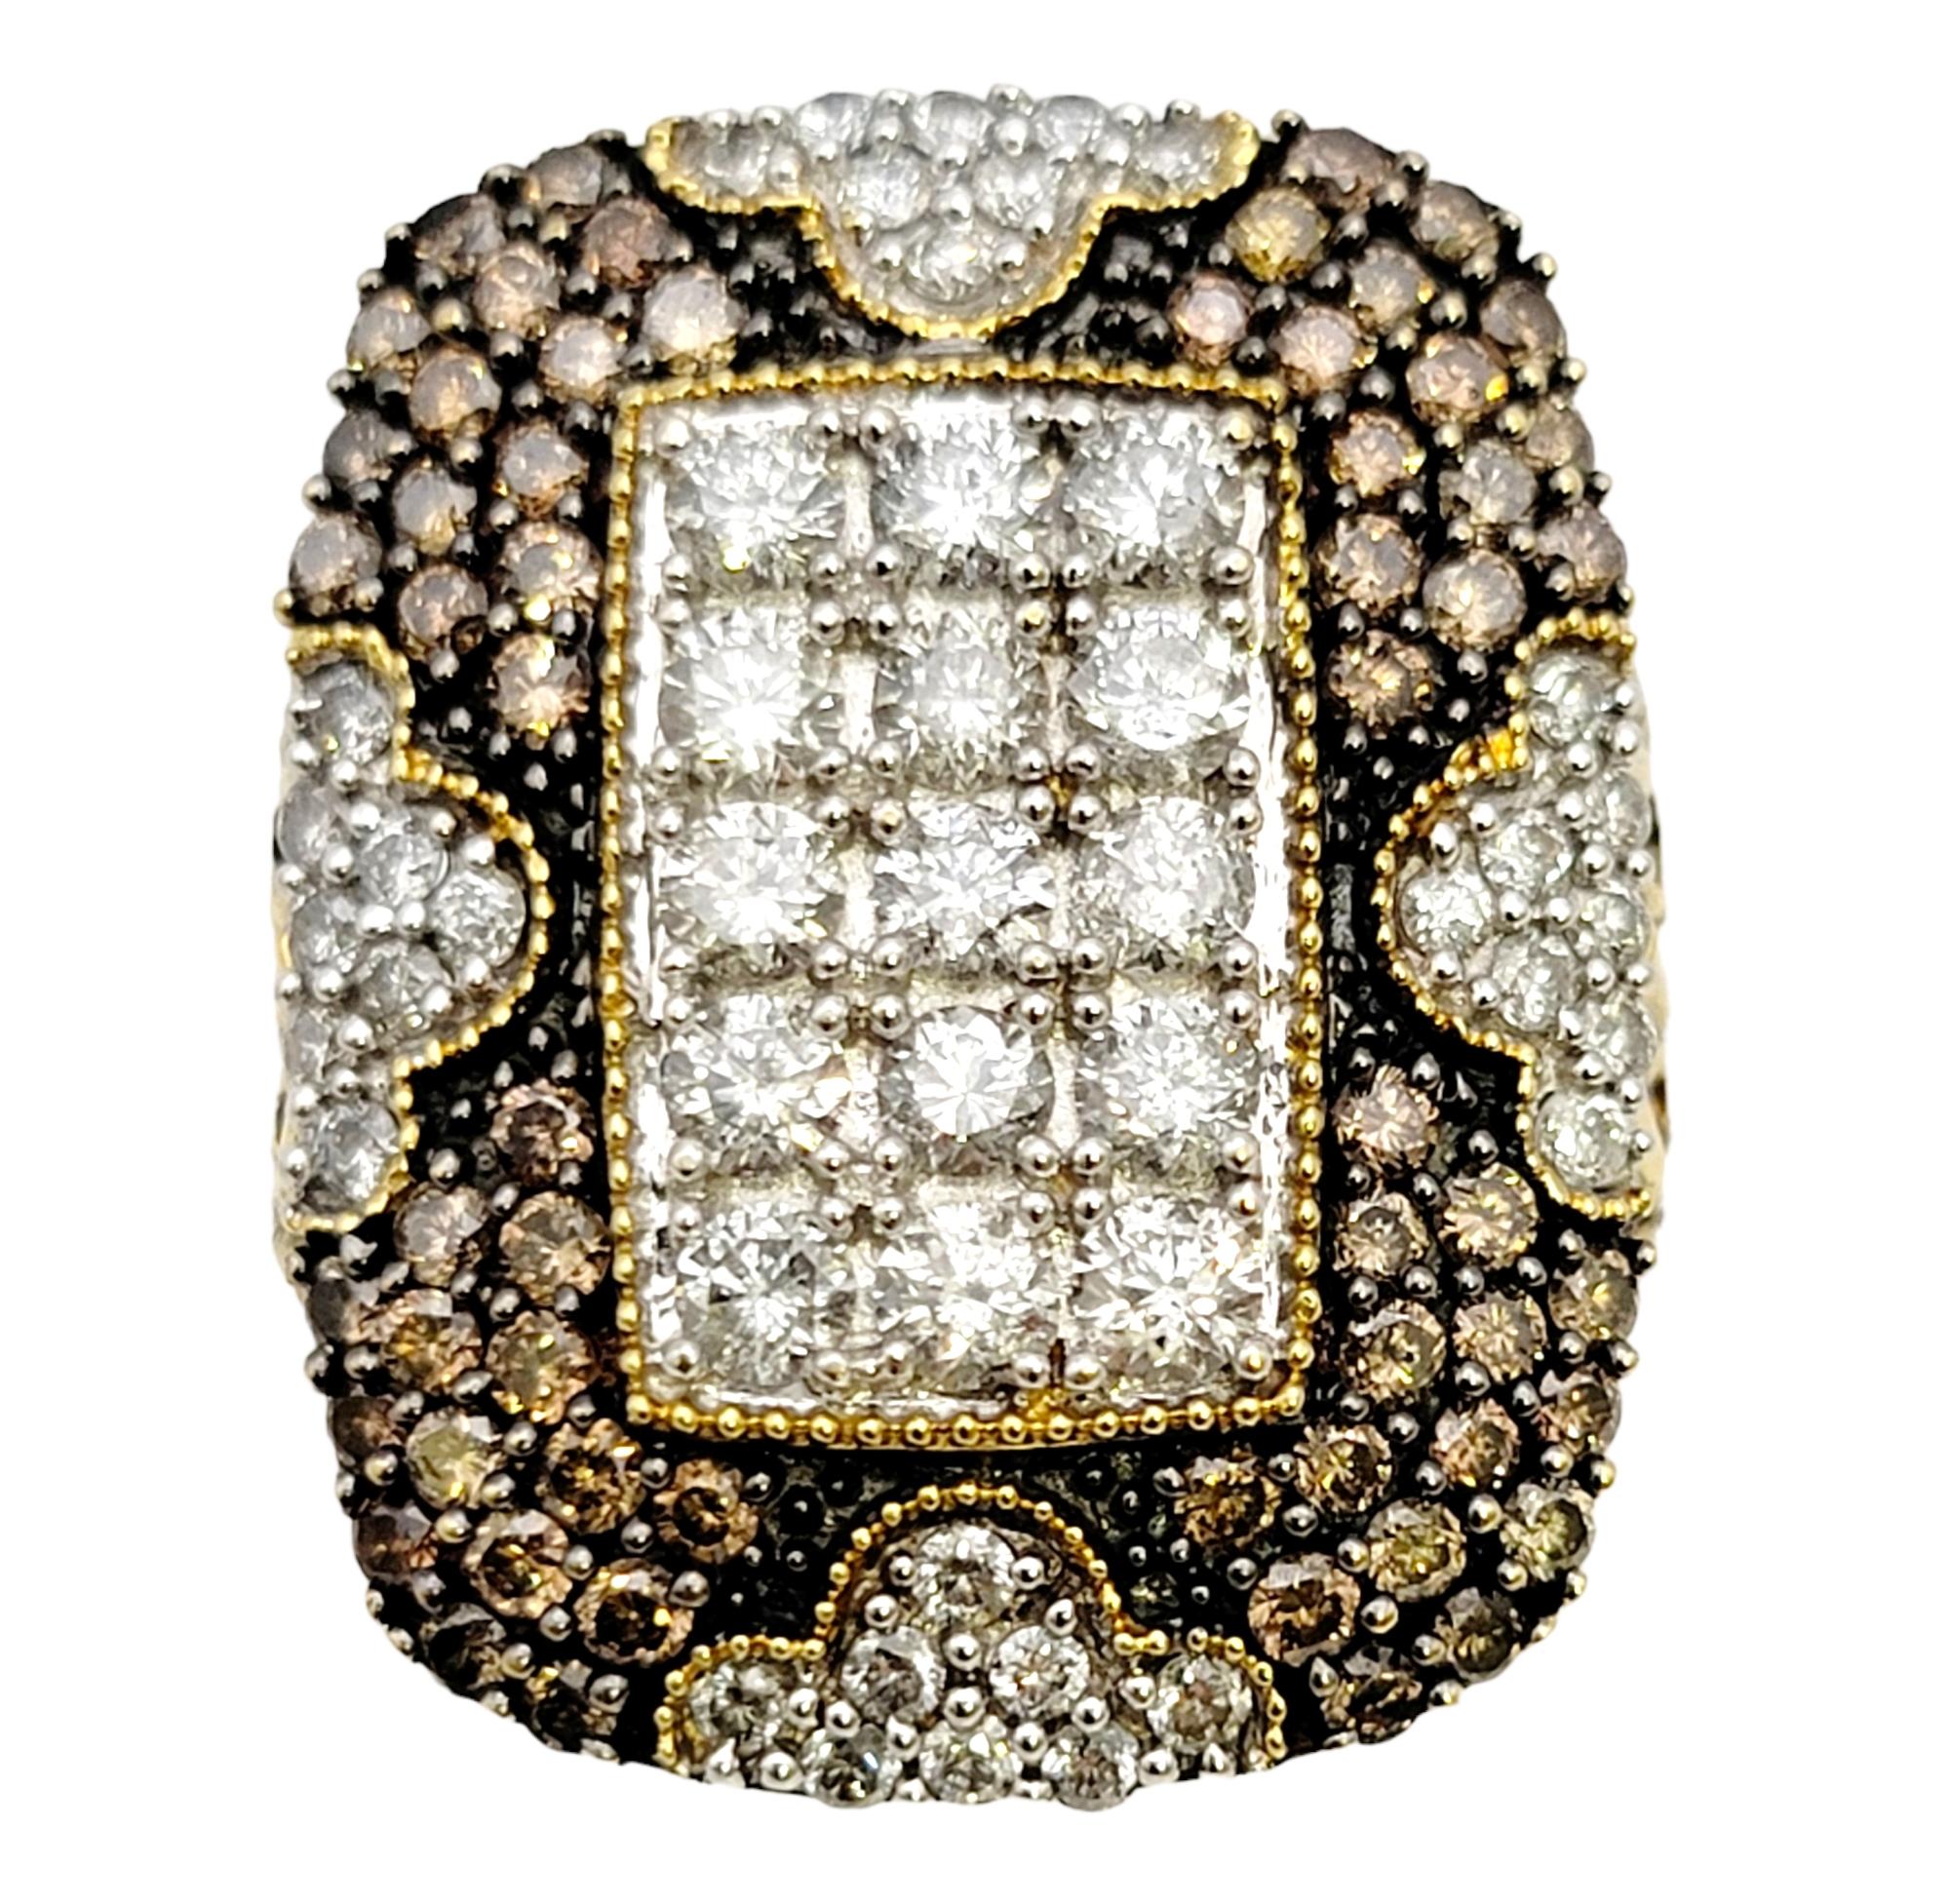 Ring size: 8.5

Featured here is a shimmering statement piece that will fill the finger with sparkle. This lovely contemporary cocktail ring features a glittering natural diamond tablet at the center surrounded by fancy brown pave diamonds and